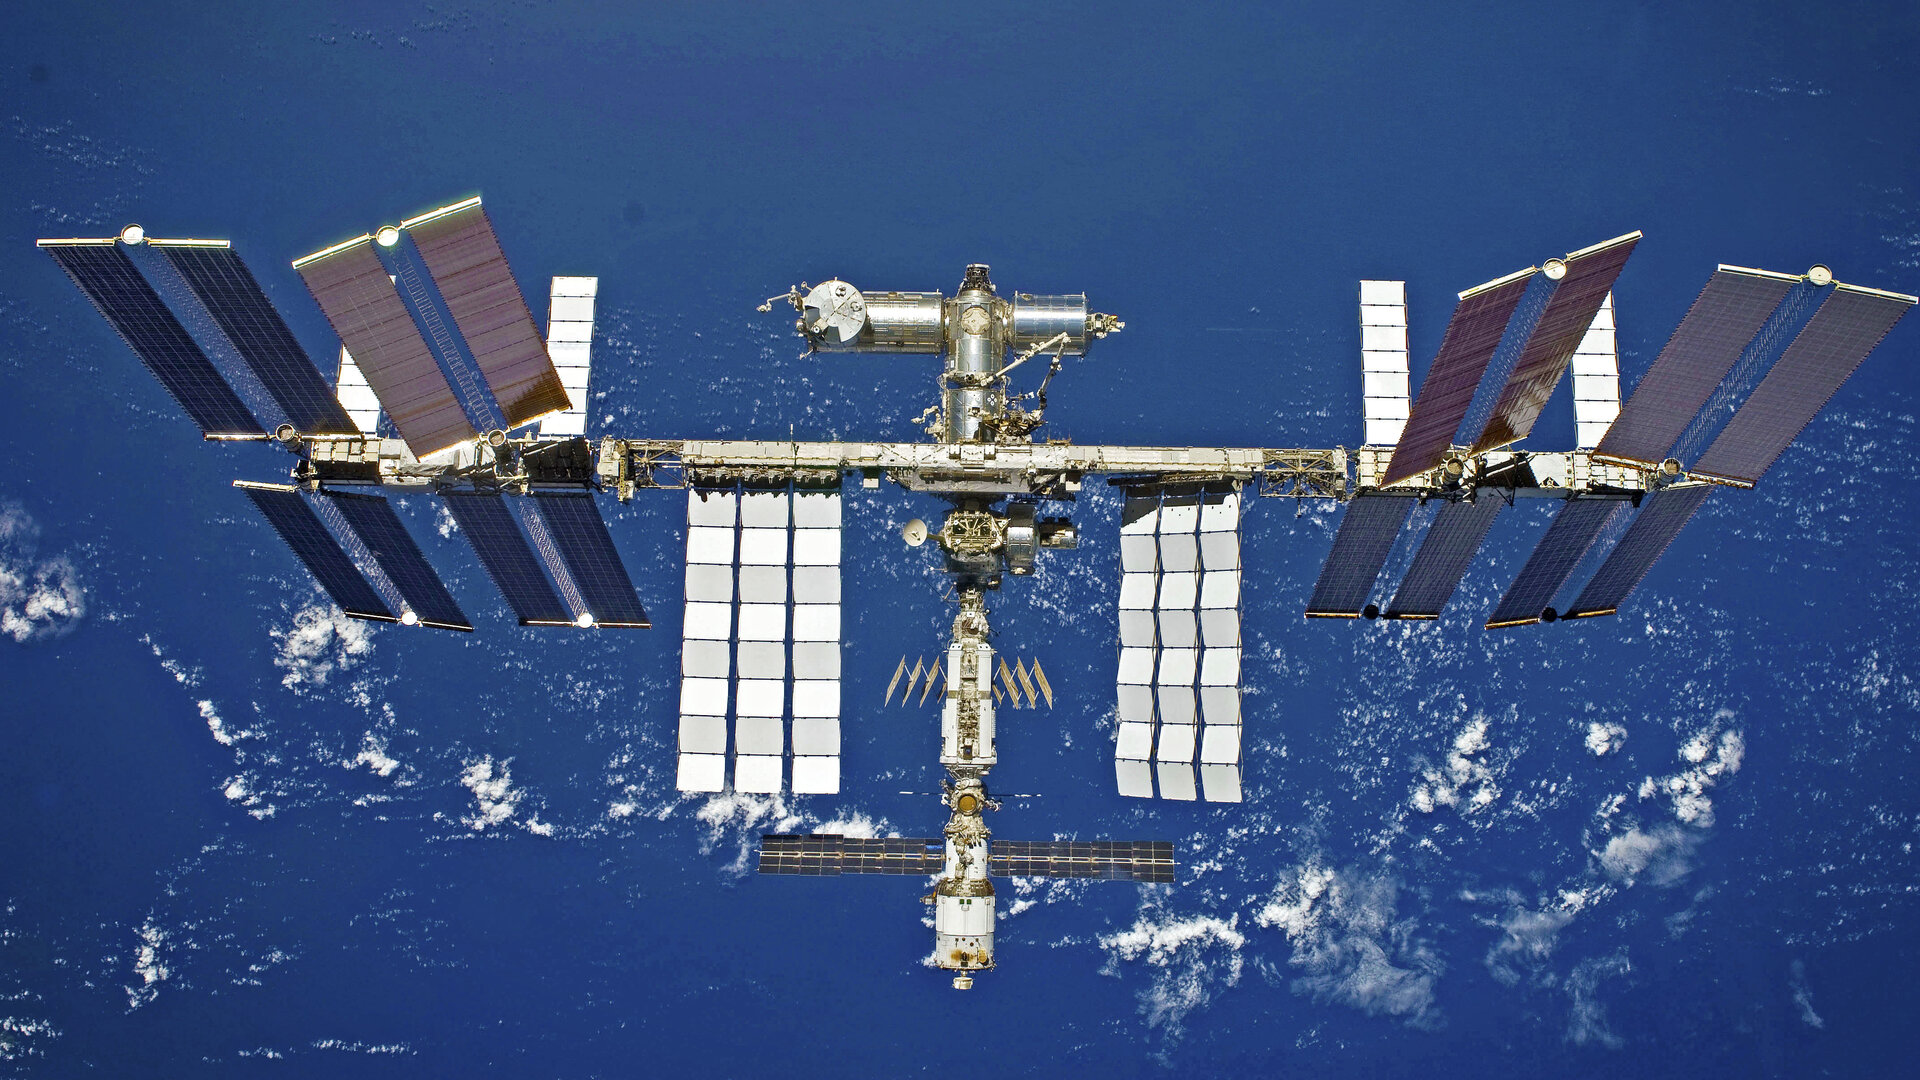 Satellite space debris forces ISS astronauts to seek shelter aboard docked capsules